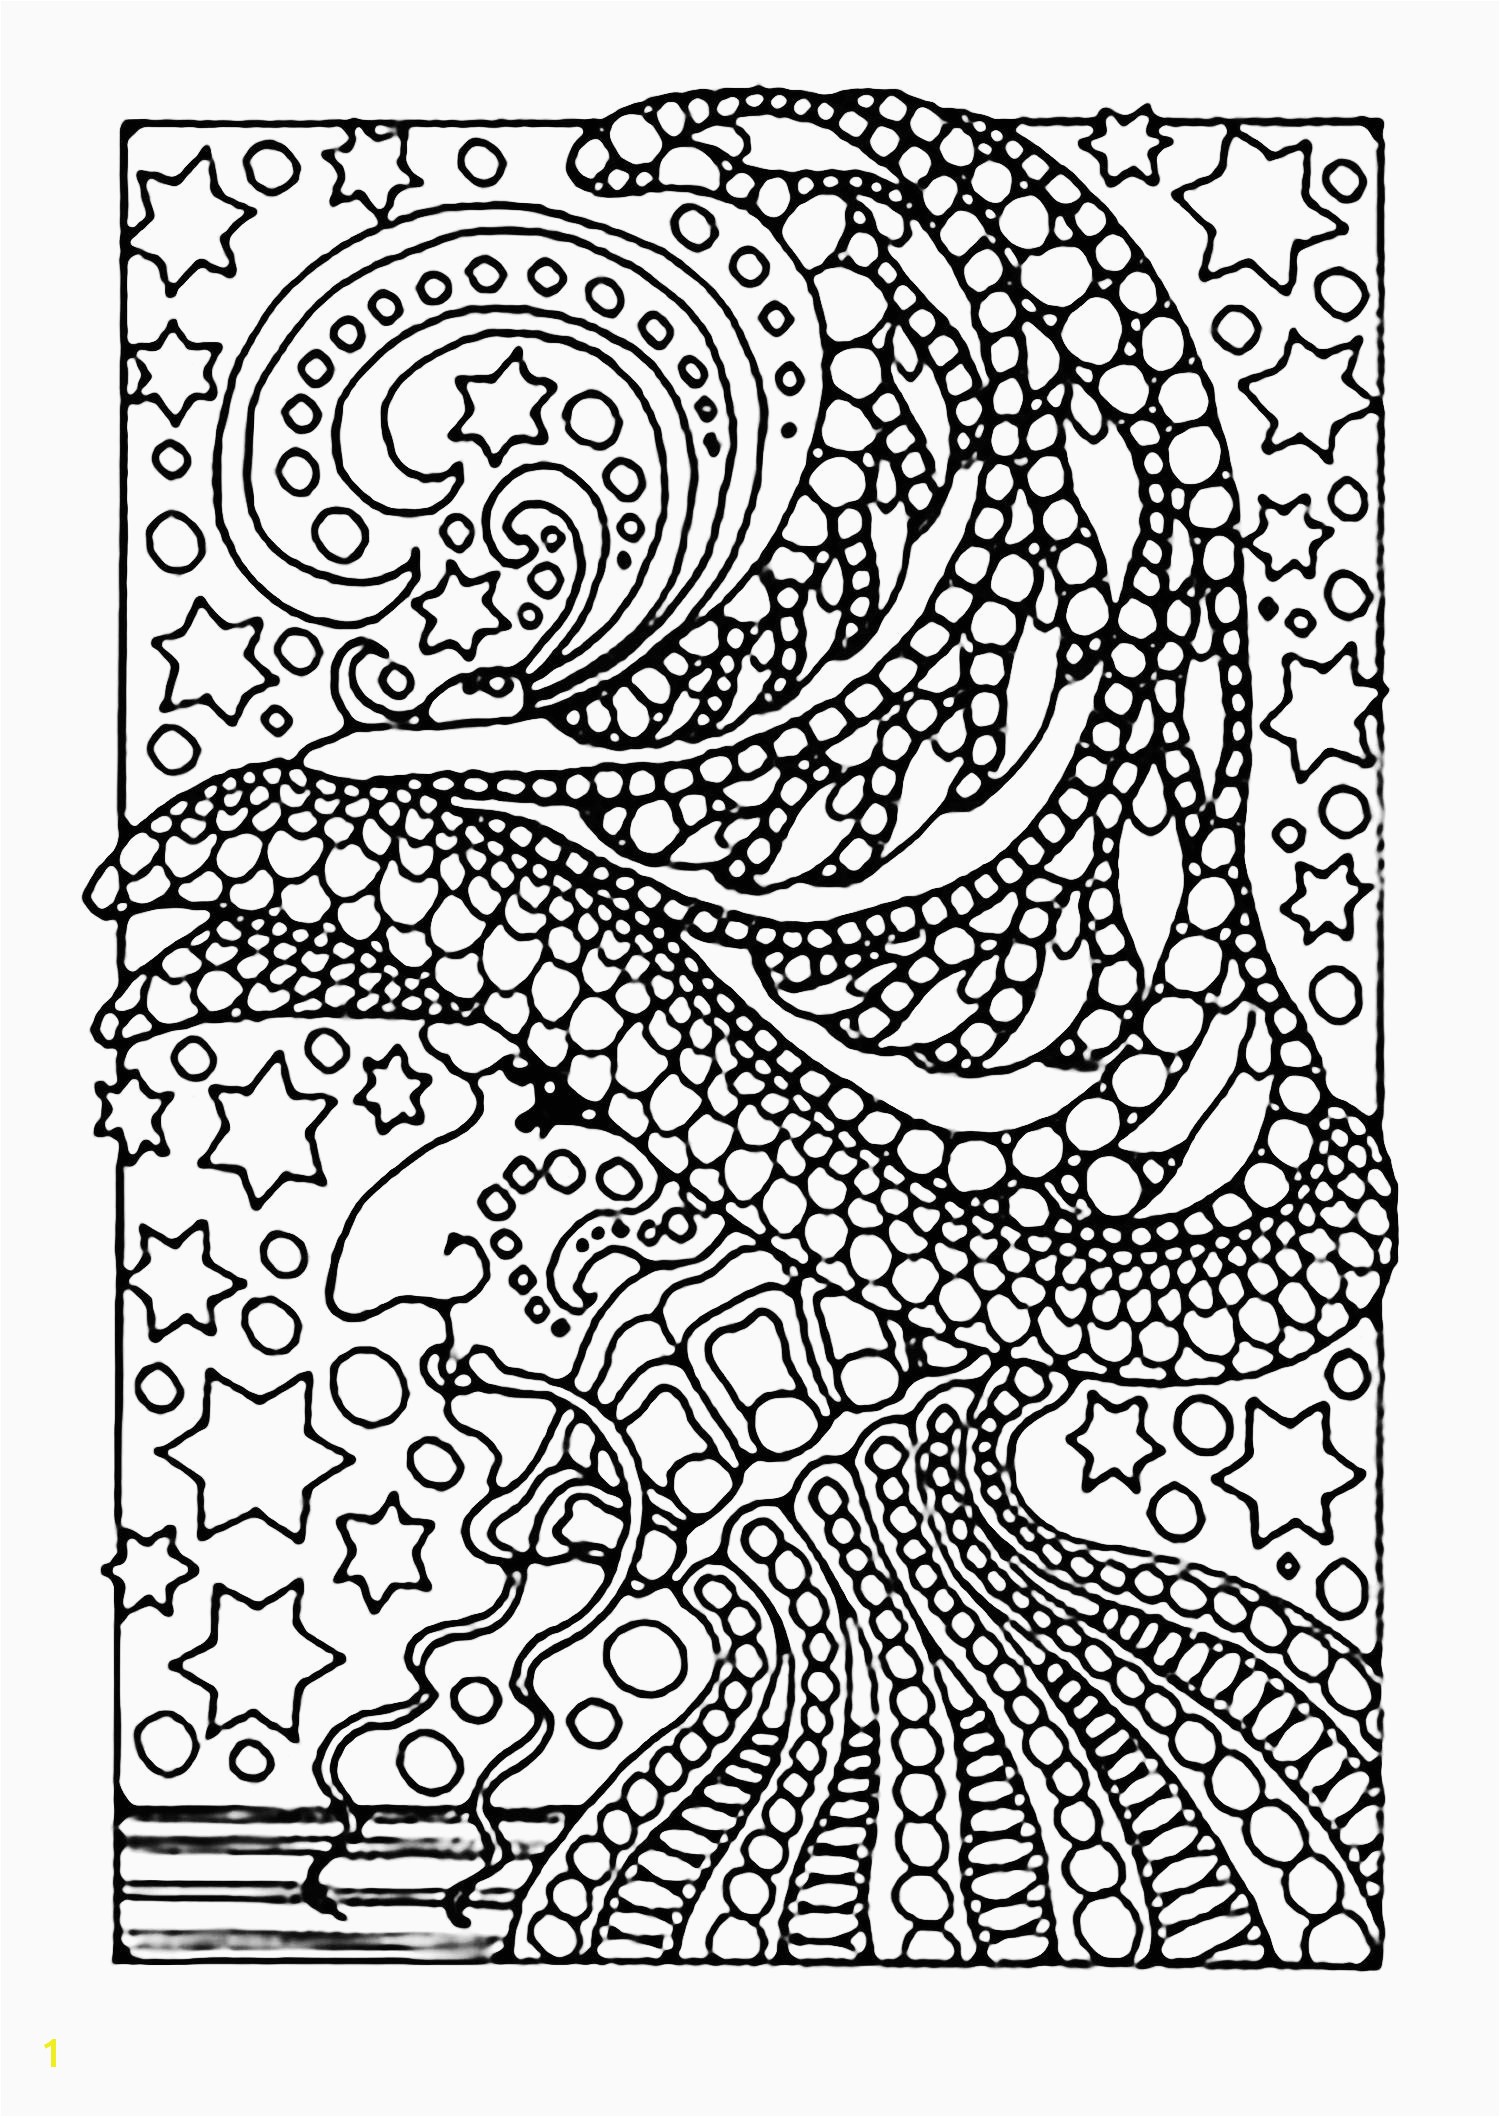 Thank You Coloring Pages Best Coloring Pages for Kids Free Line Coloring Pages to Print